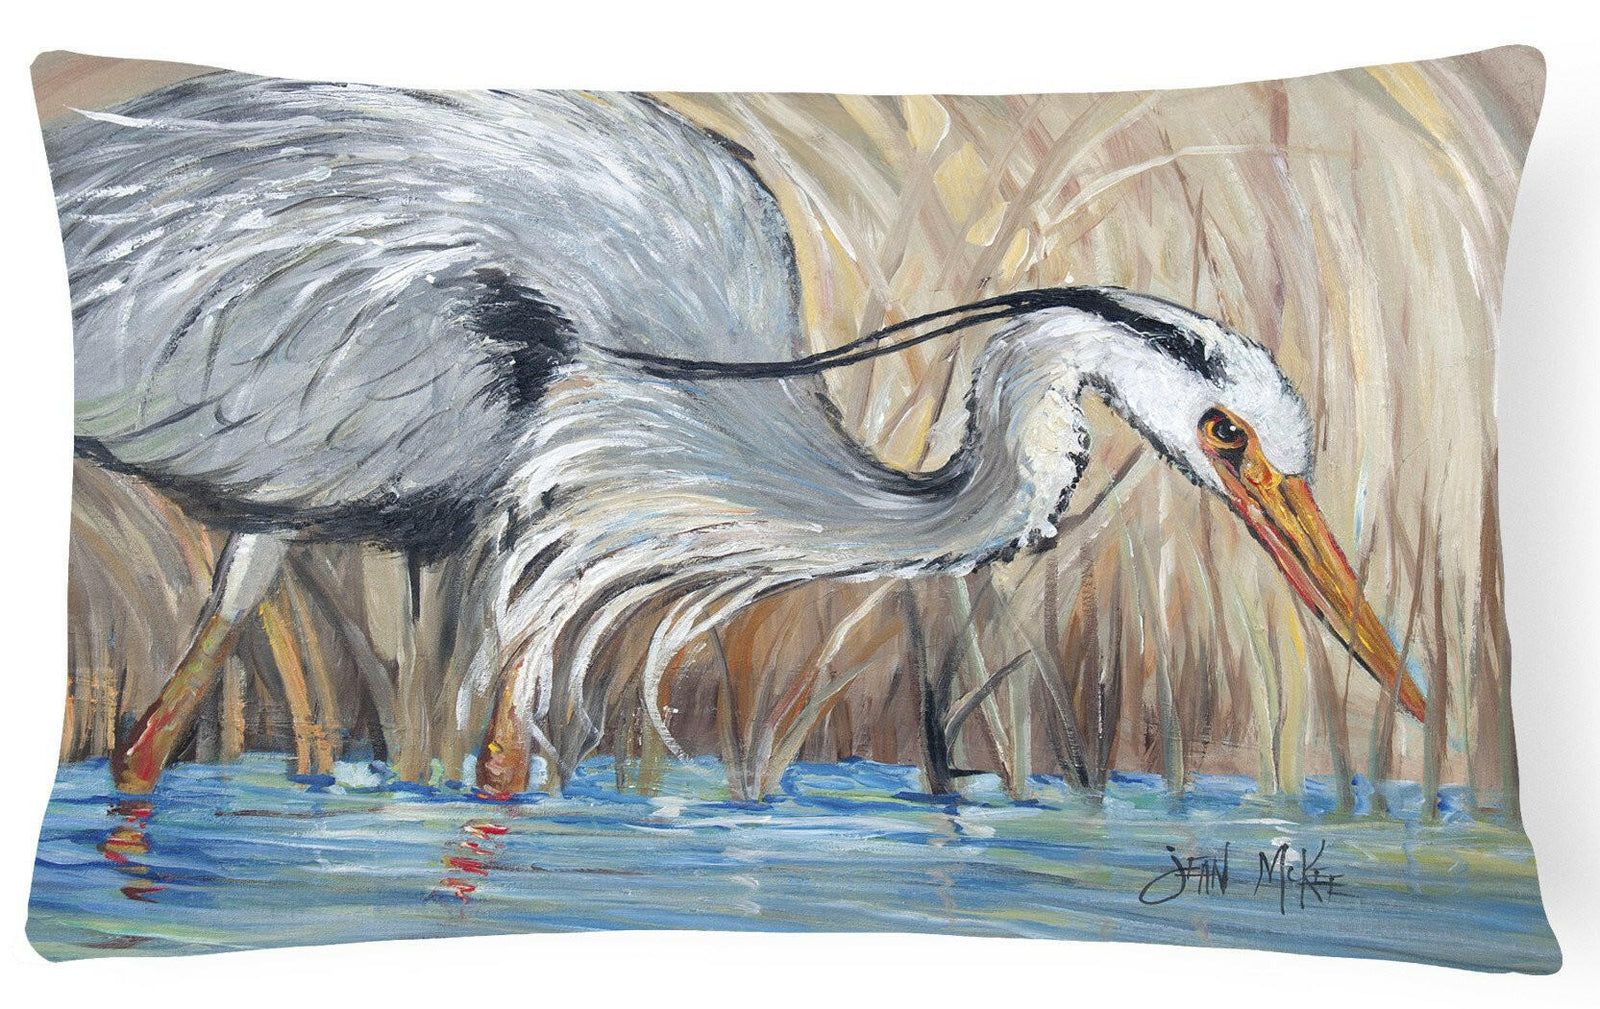 Blue Heron in the reeds Canvas Fabric Decorative Pillow JMK1013PW1216 by Caroline's Treasures